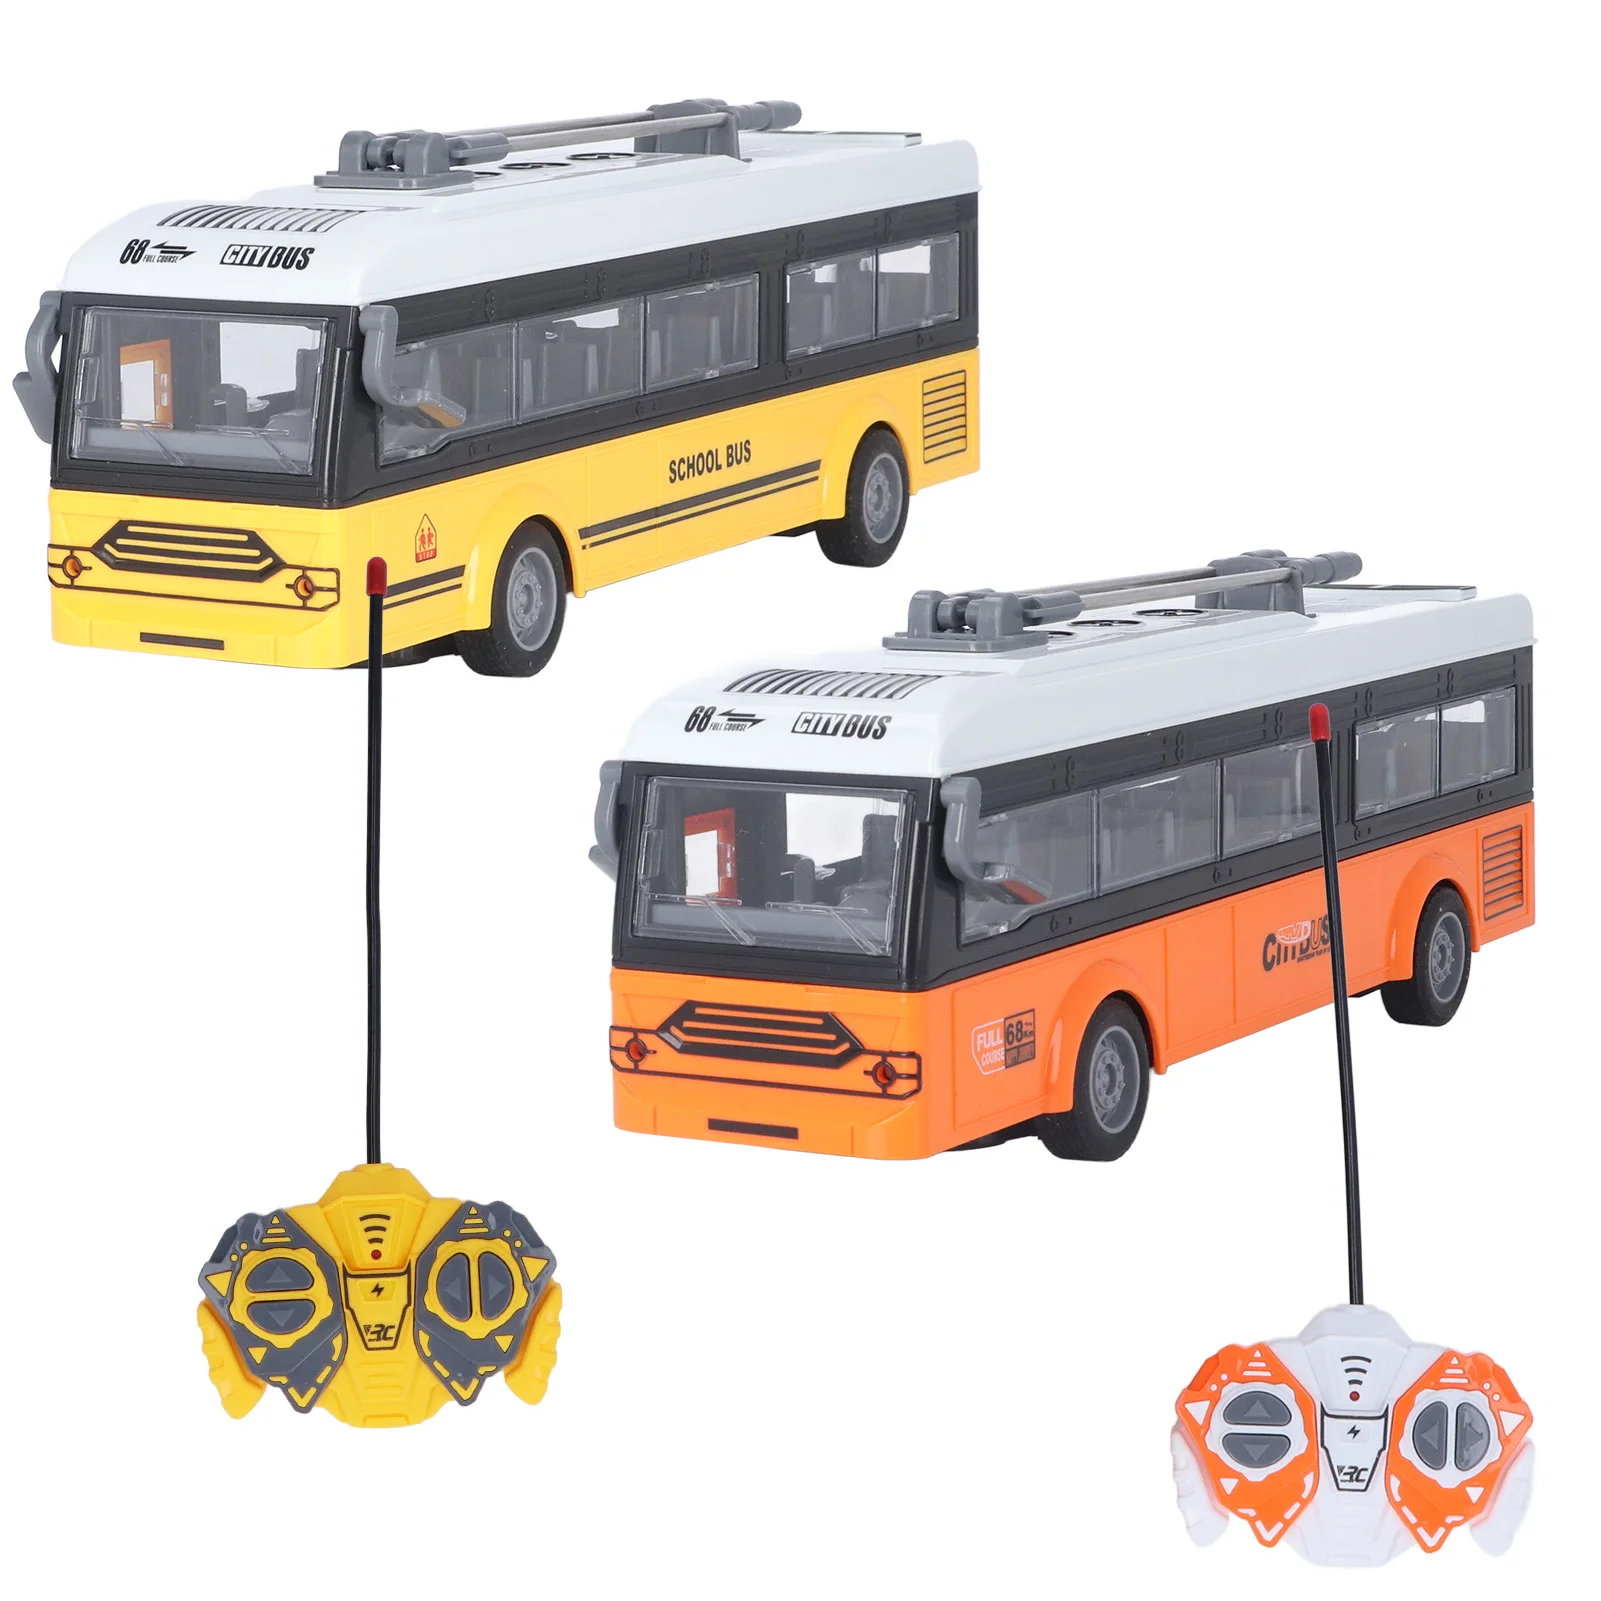 

Remote Control Bus 4 CH Lifelike Opening Doors Single Layer Sightseeing Travel Remote Control School Bus Kids Electric Car Toy